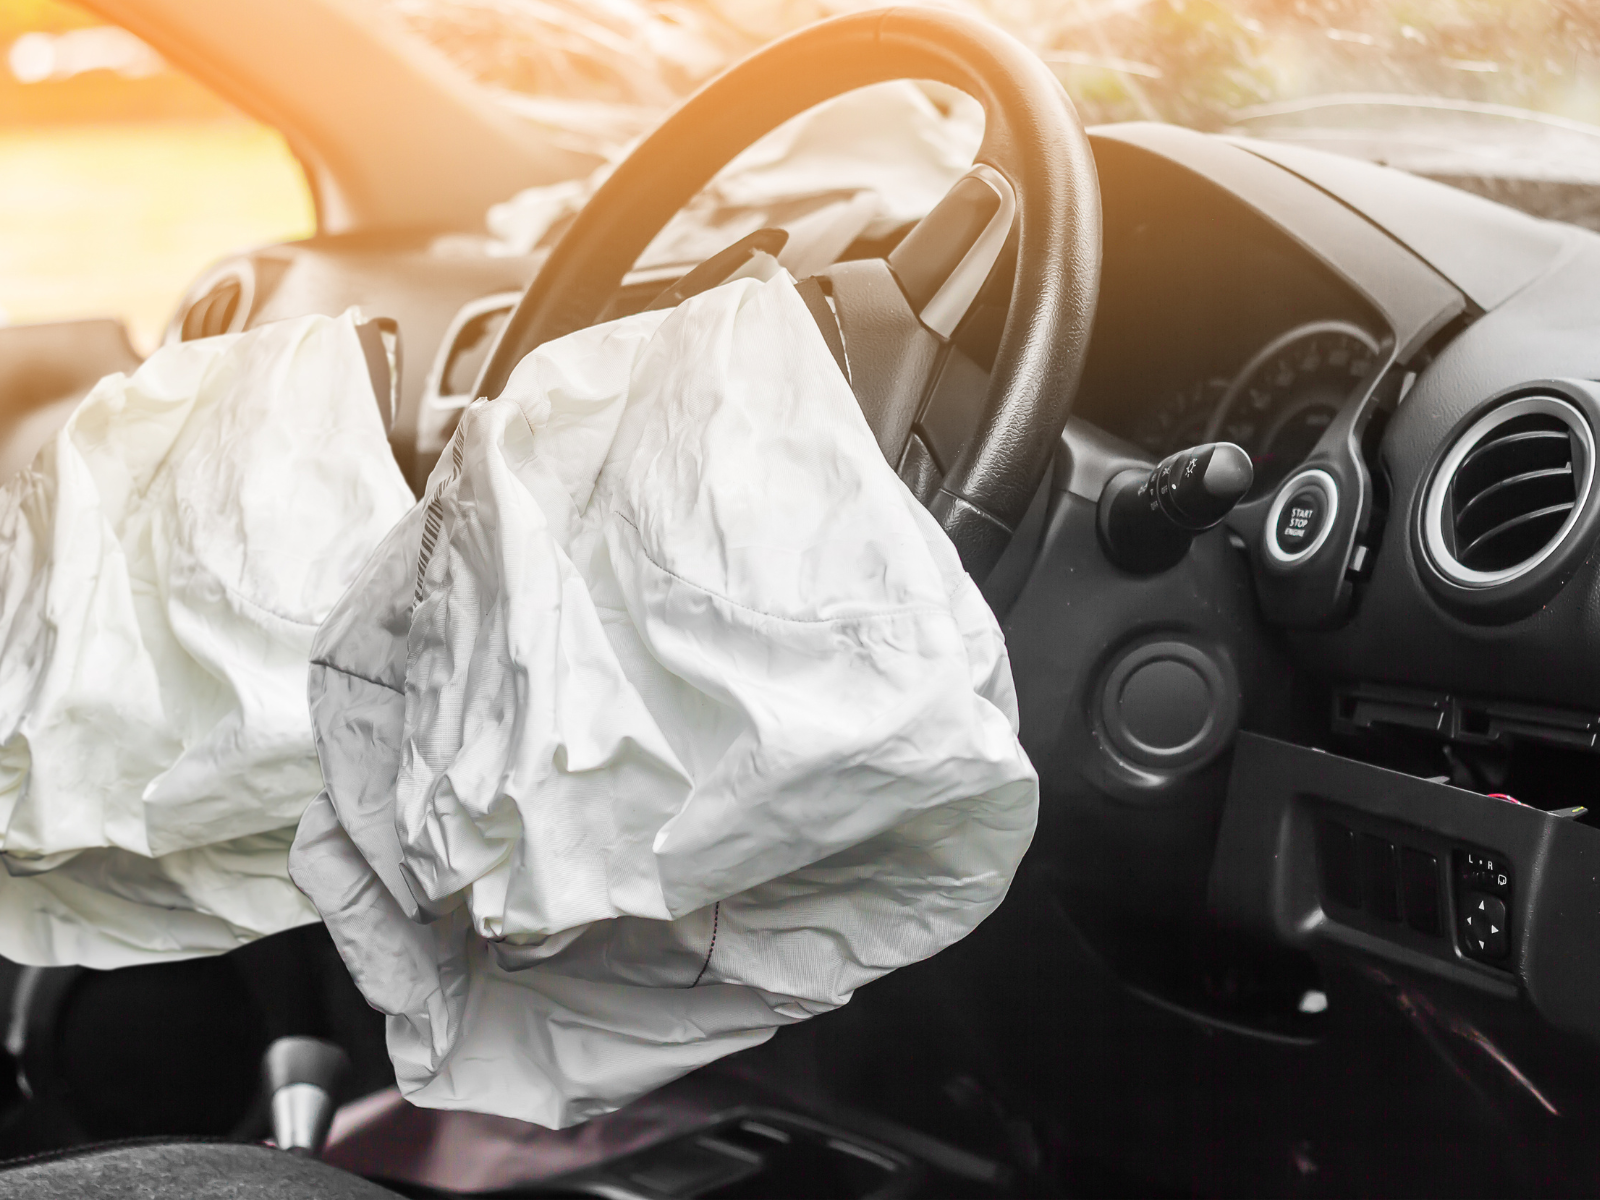 Airbags for All: Tailoring Automotive Safety for Every Body